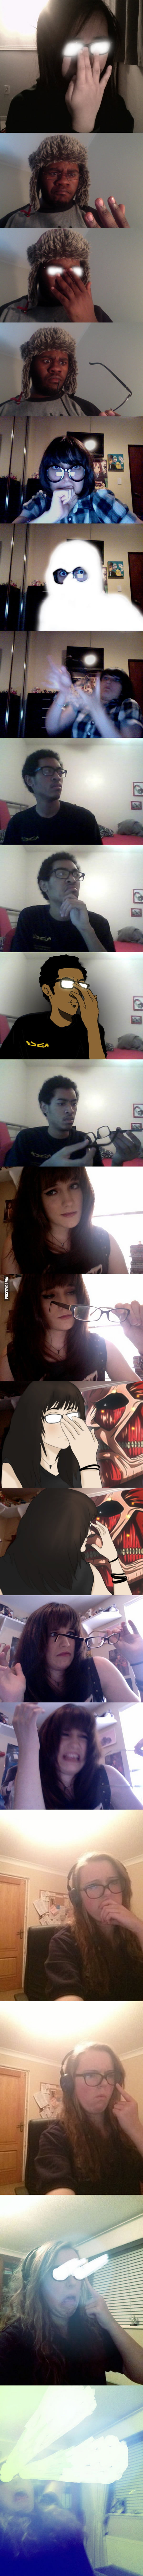 People Doing The Anime Glasses Thing 9GAG